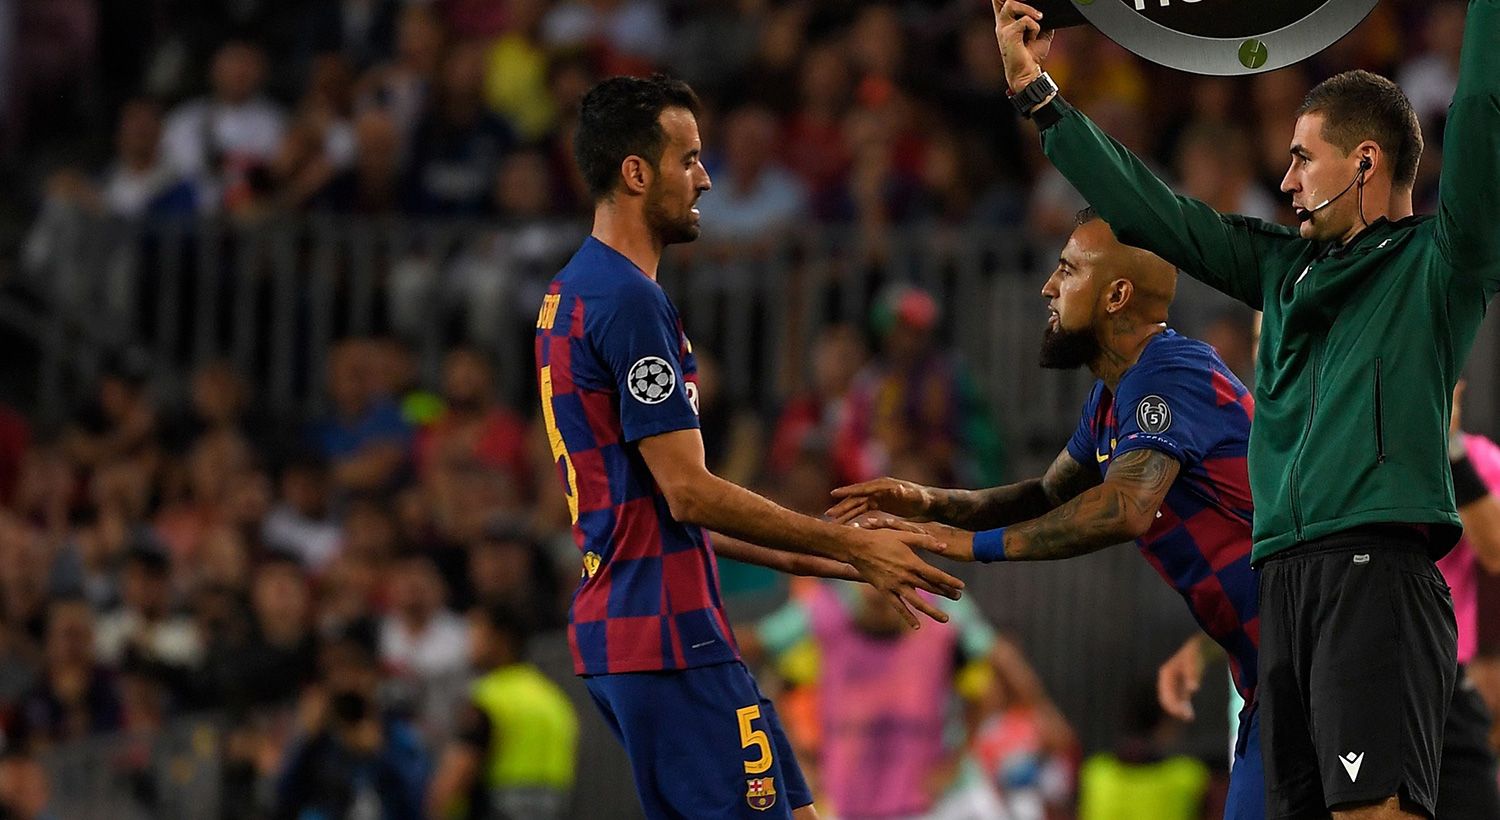 Busquets being substituted by Vidal